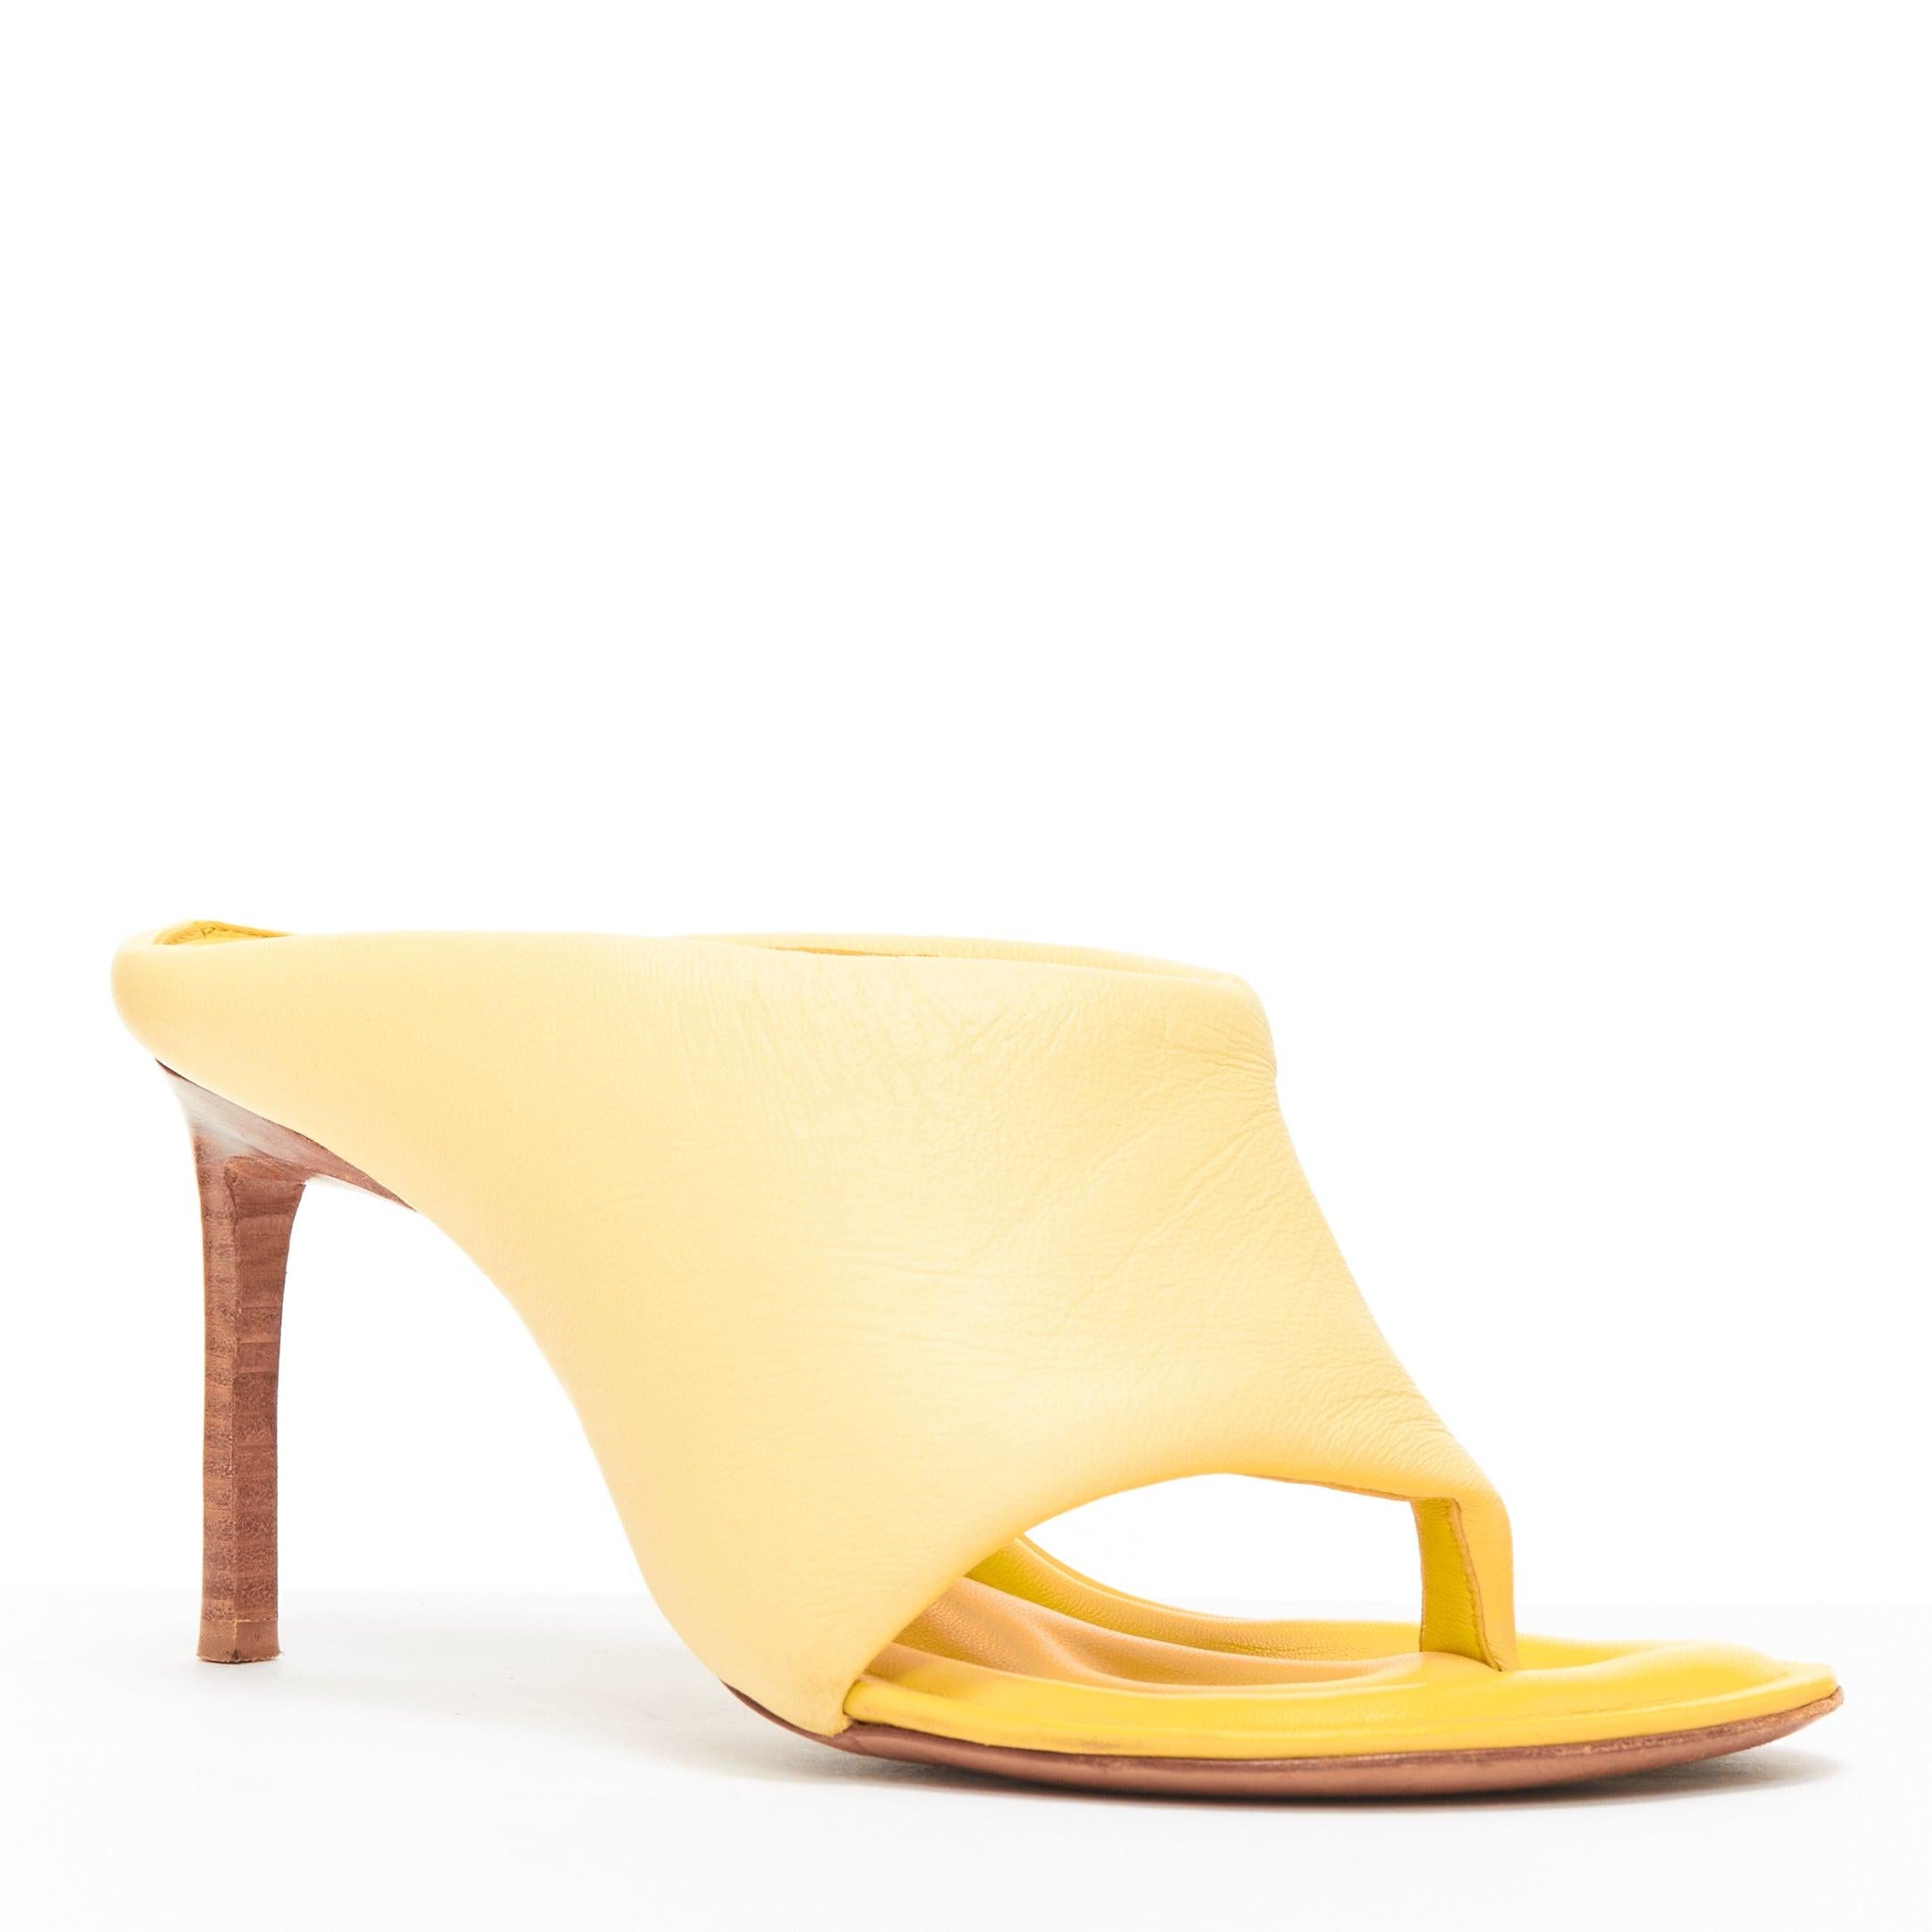 JACQUEMUS Les Mules Limone light yellow puffy lambskin thong mule heel EU36
Reference: JACG/A00151
Brand: Jacquemus
Model: Les Mules Limone
Material: Leather
Color: Yellow
Pattern: Solid
Lining: Yellow Leather
Extra Details: Puffy leather strap.